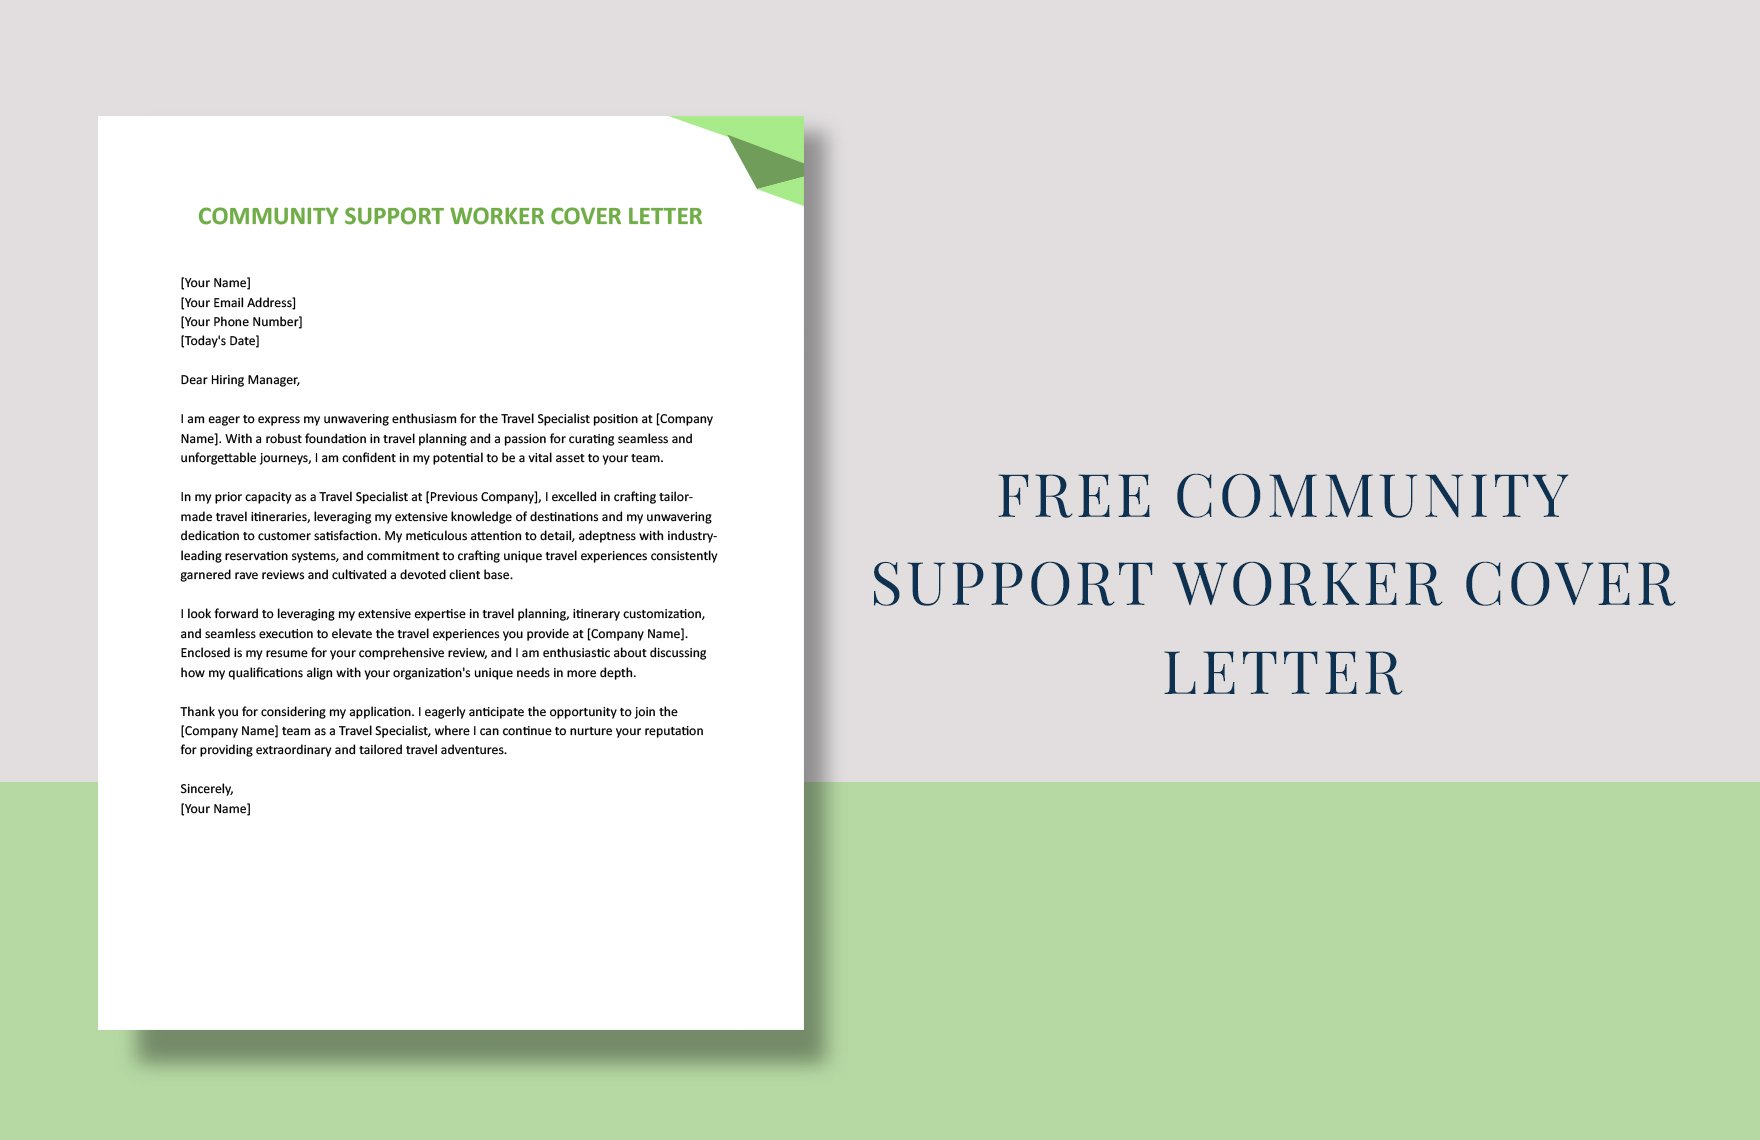 Community Support Worker Cover Letter in Word, Google Docs